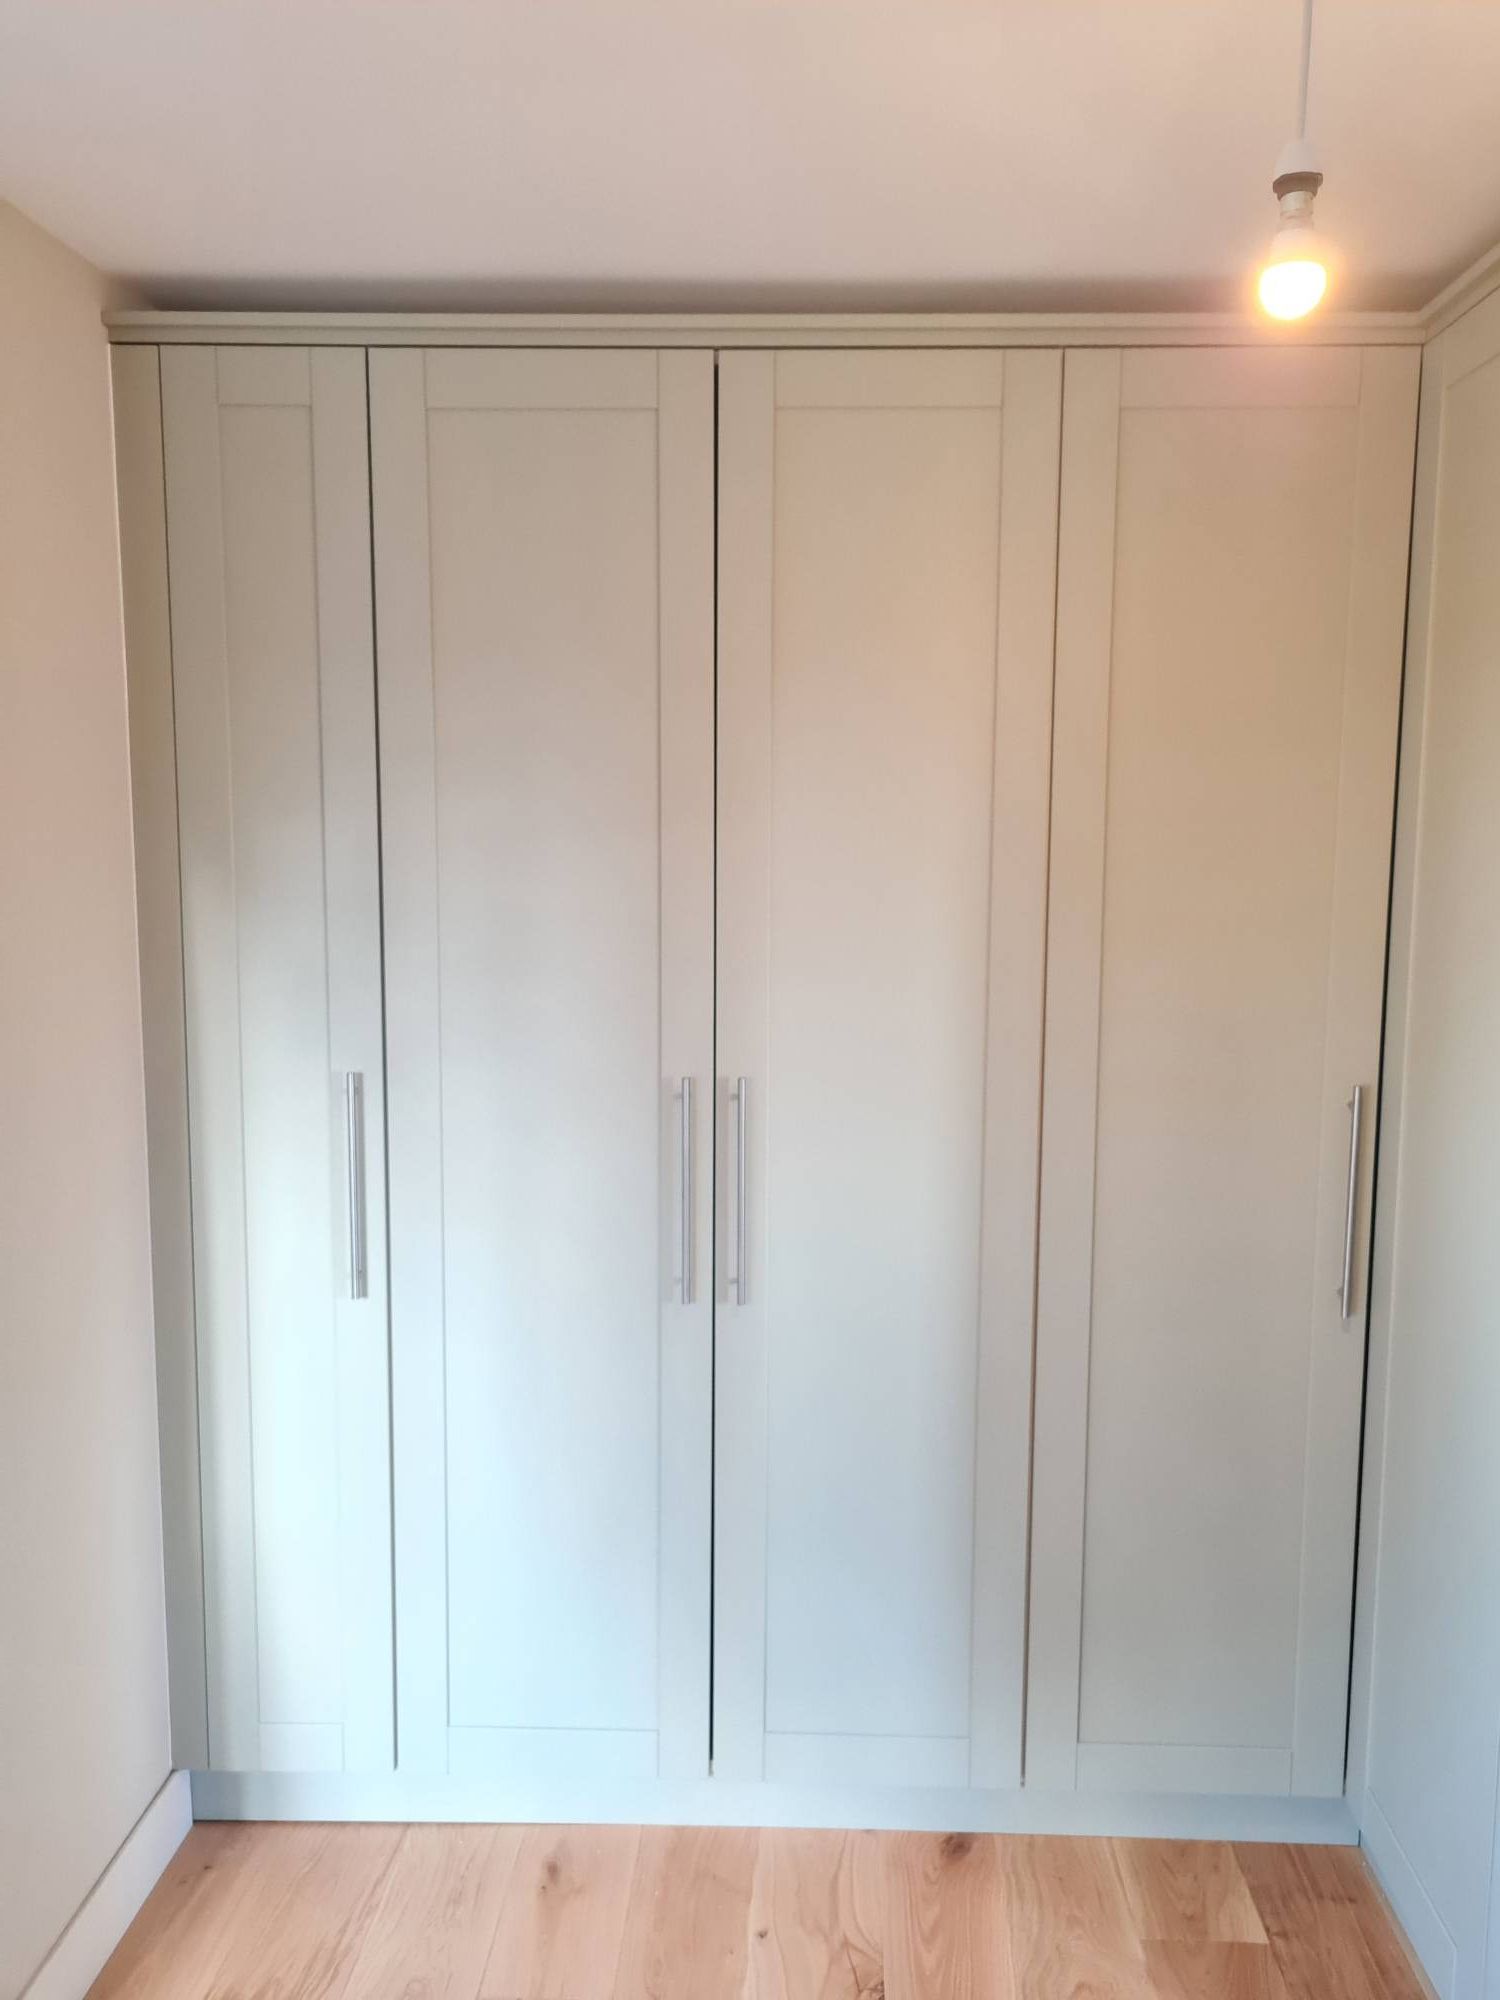 Carpentry & Kitchens In Maidstone Kent /wardrobes/decking Pertaining To Farrow And Ball Painted Wardrobes (Gallery 15 of 20)